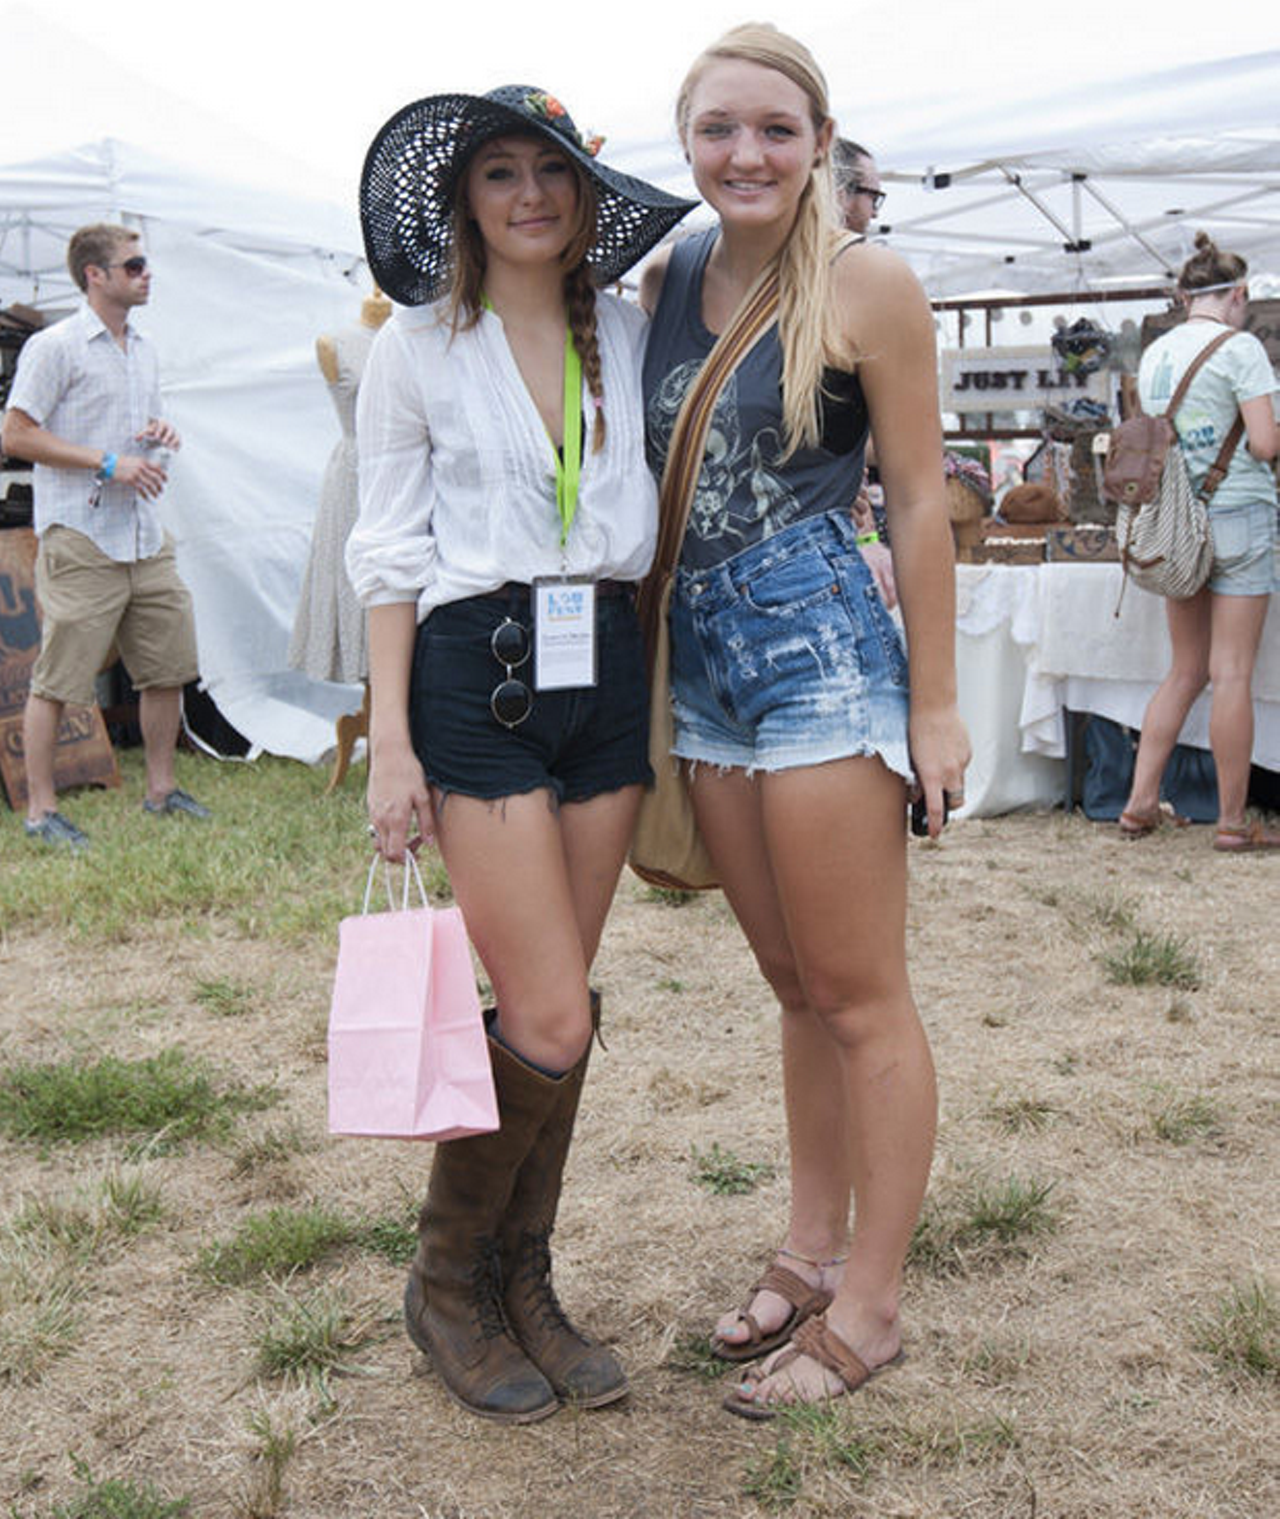 LouFest attendees donned their quirky, fun attire for the concerts. Even with rain, sunglasses were a necessity for most. The jorts and shades of neon were also popular items to sport. More LouFest fashion photos.